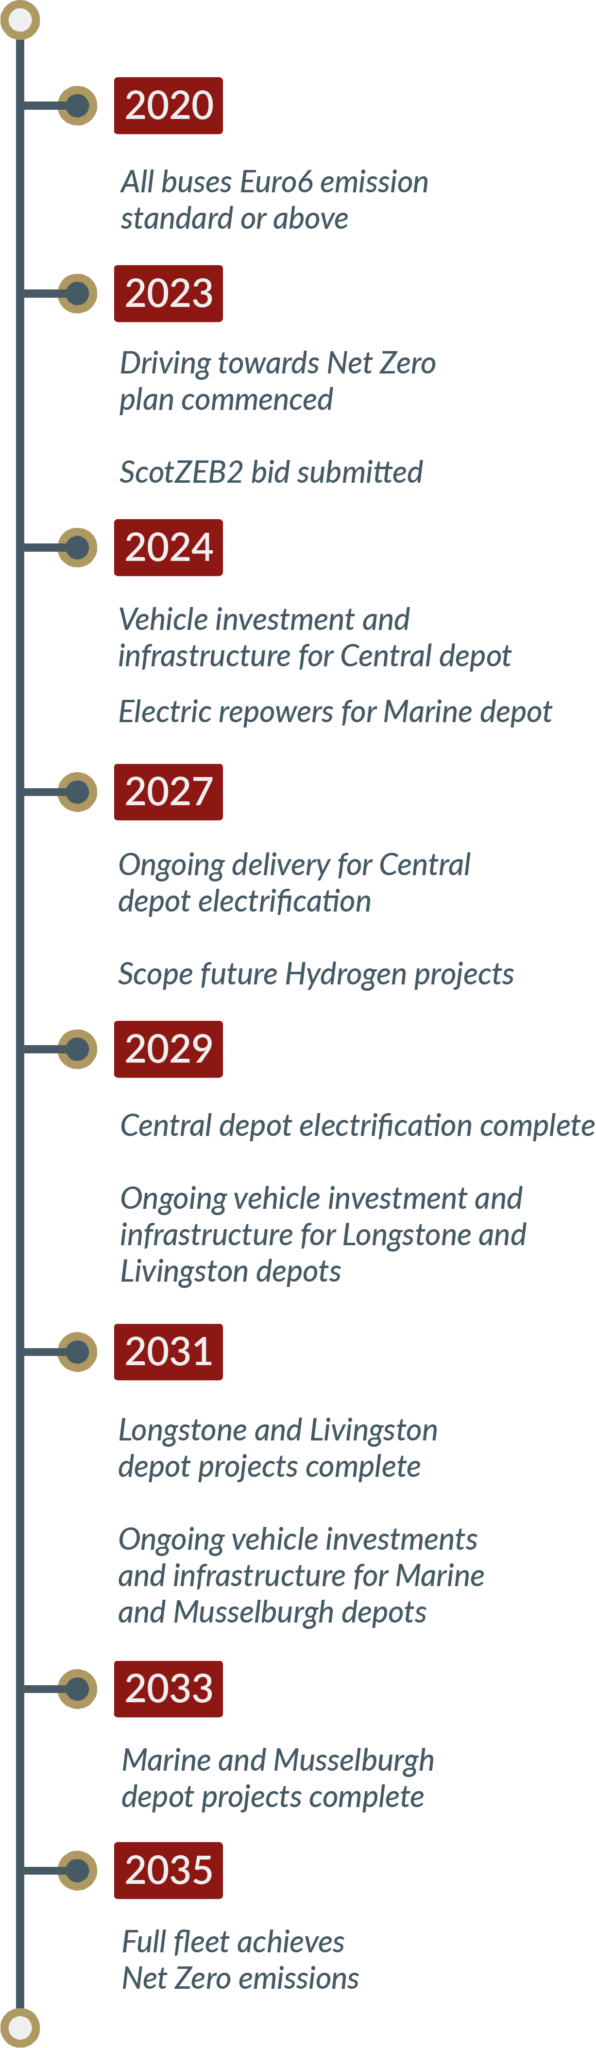 Lothian: Driving towards Net Zero Timeline. 2020: All buses Euro6 emission standard or above. 2023: Driving towards Net Zero plan commenced. ScotZEB2 bid submitted. 2024: Vehicle investment and infrastructure for Central depot. Electric repowers for Marine depot. 2027: Ongoing delivery for Central depot electrification. Scope future Hydrogen projects. 2029: Central depot electrification complete. Ongoing vehicle investment and infrastructure for Longstone and Livingston depots. 2031: Longstone and Livingston depot projects complete. Ongoing vehicle investment and infrastructure for Marine and Musselburgh depots. 2033: Marine and Musselburgh depot projects complete. 2035: Full fleet achieves Net Zero emissions.